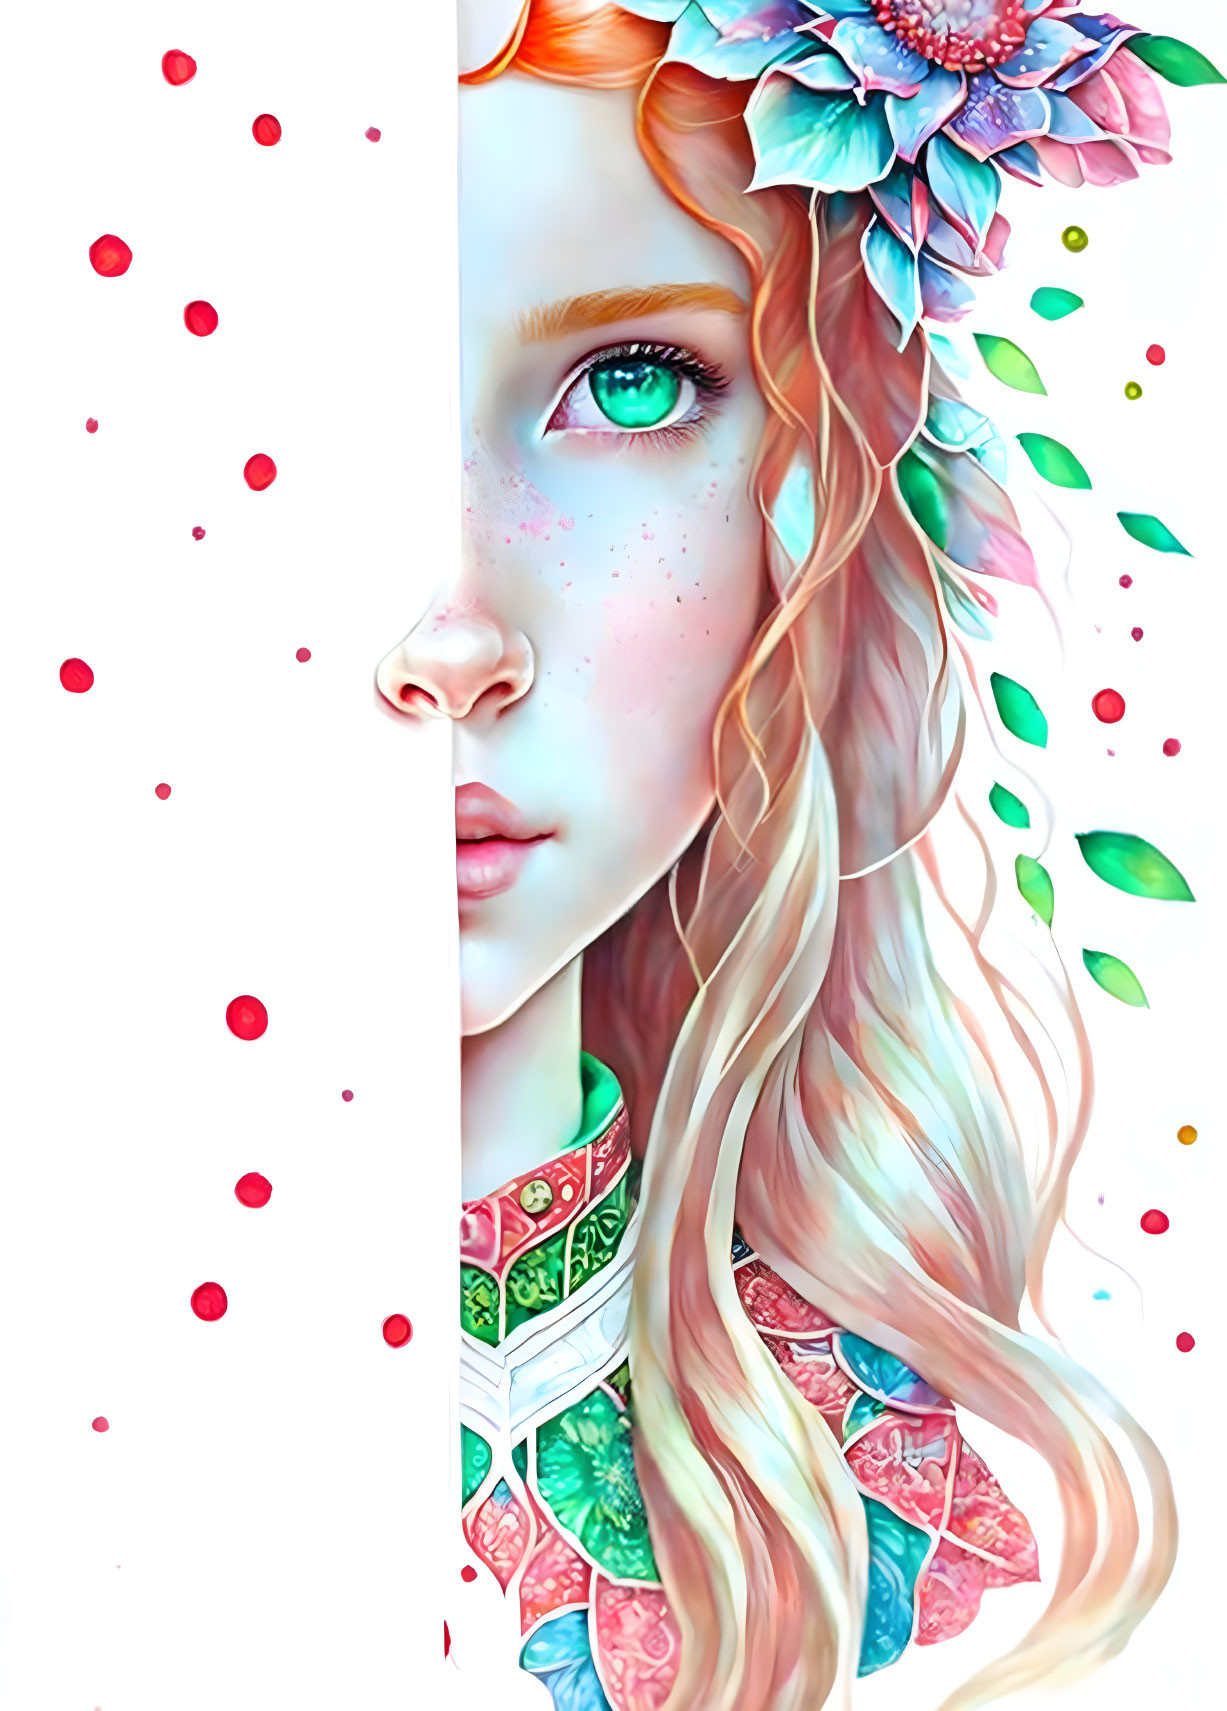 Colorful illustration: Woman with green eyes, floral headpiece, wavy hair with leaves, pink